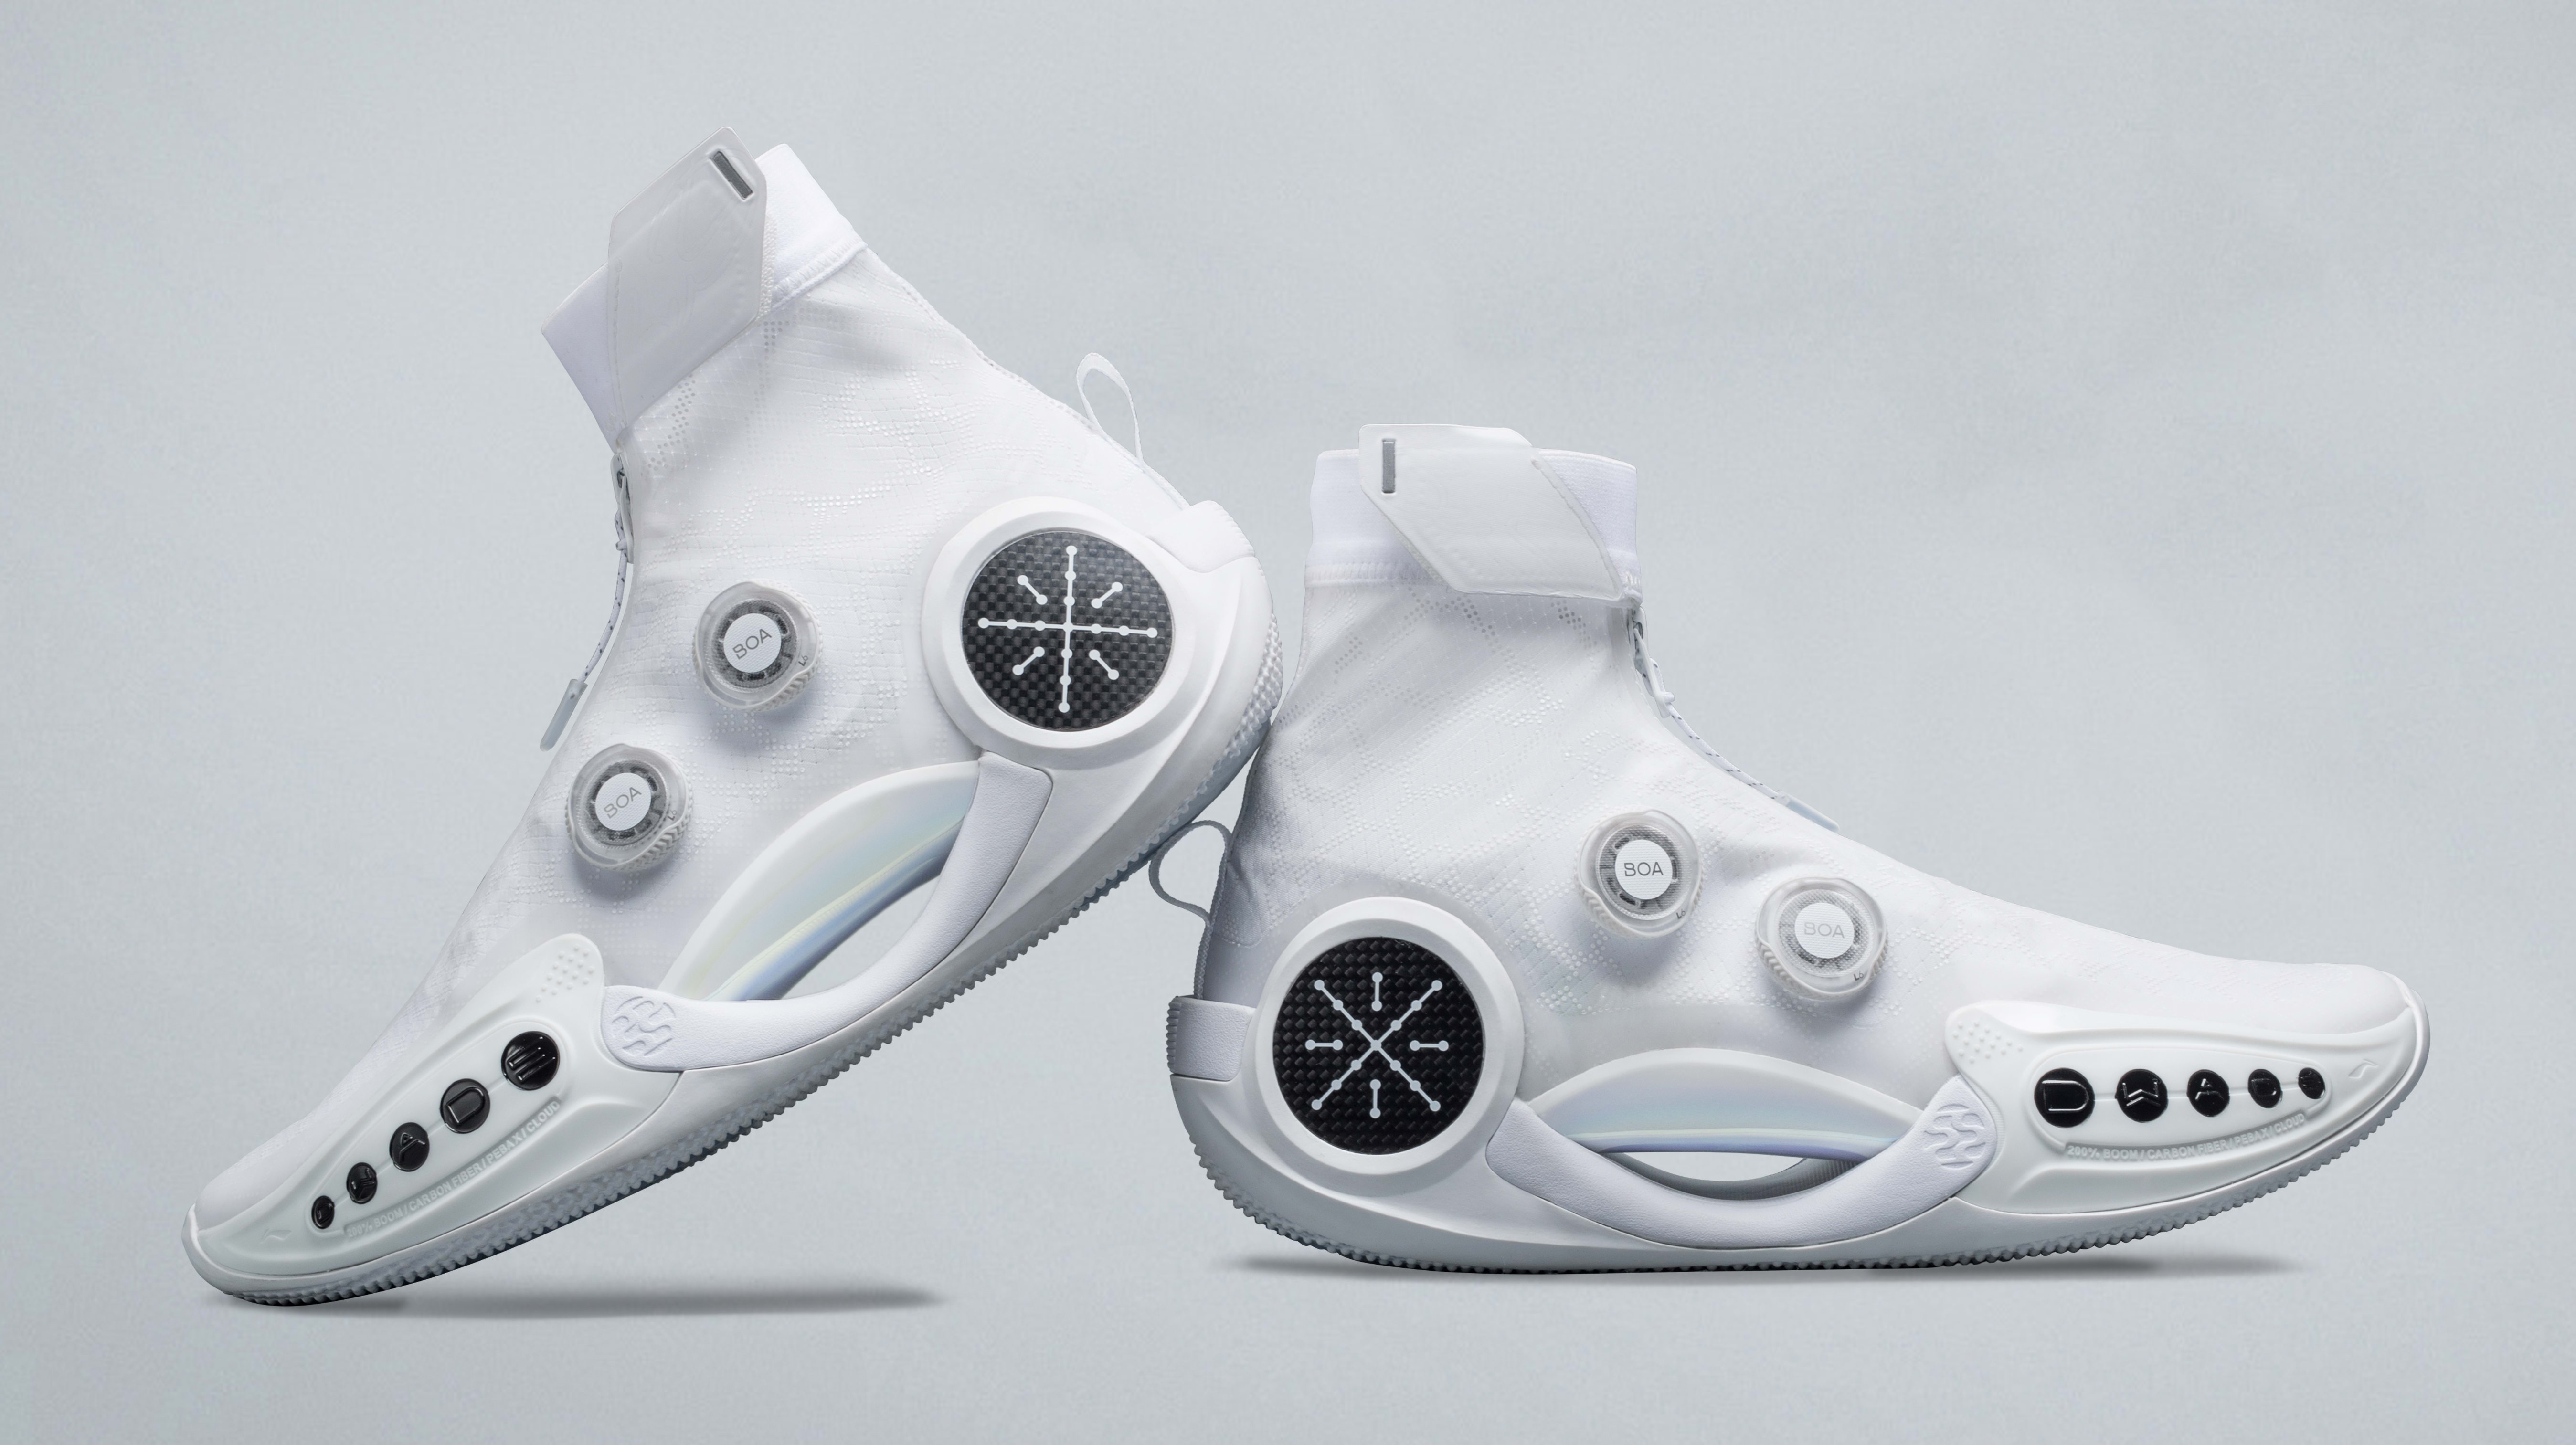 Dwyane Wade's Next Signature Shoe With Li-Ning Is Releasing Soon | Complex